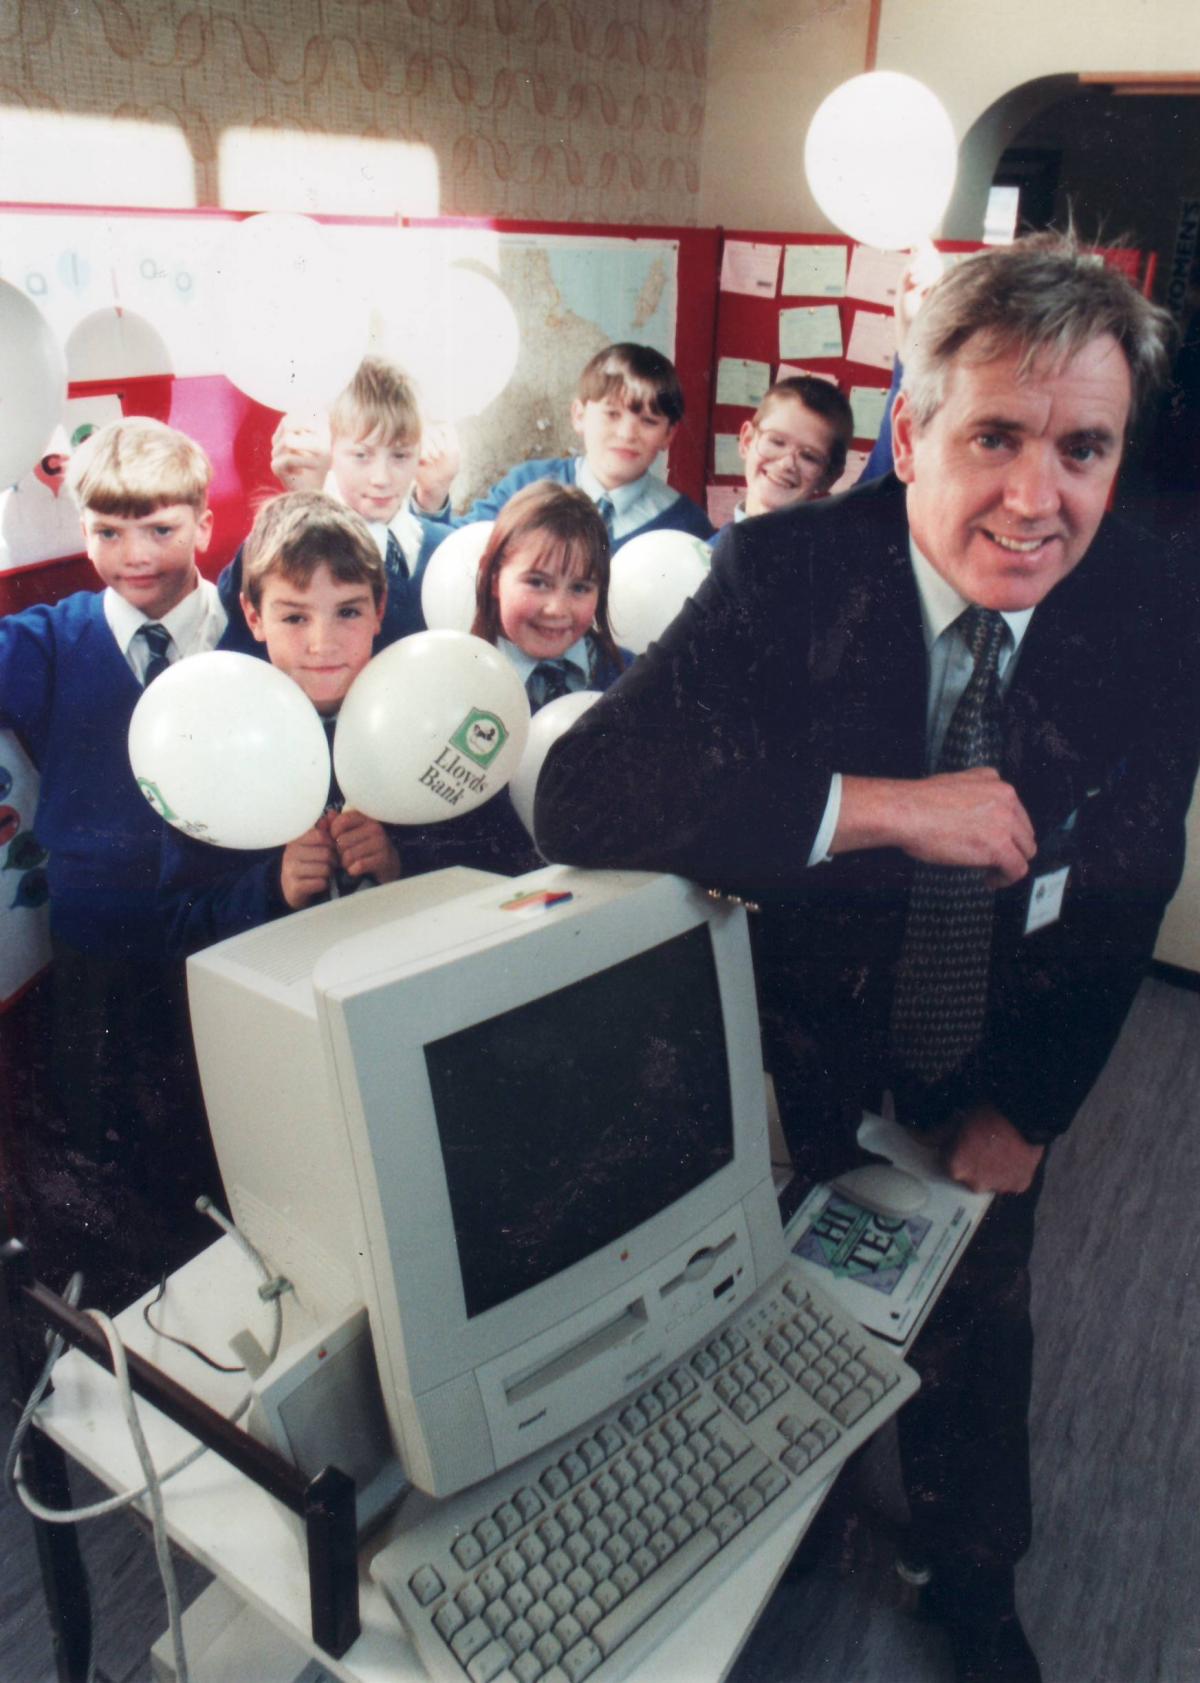 A Lloyds Bank visit in 1996